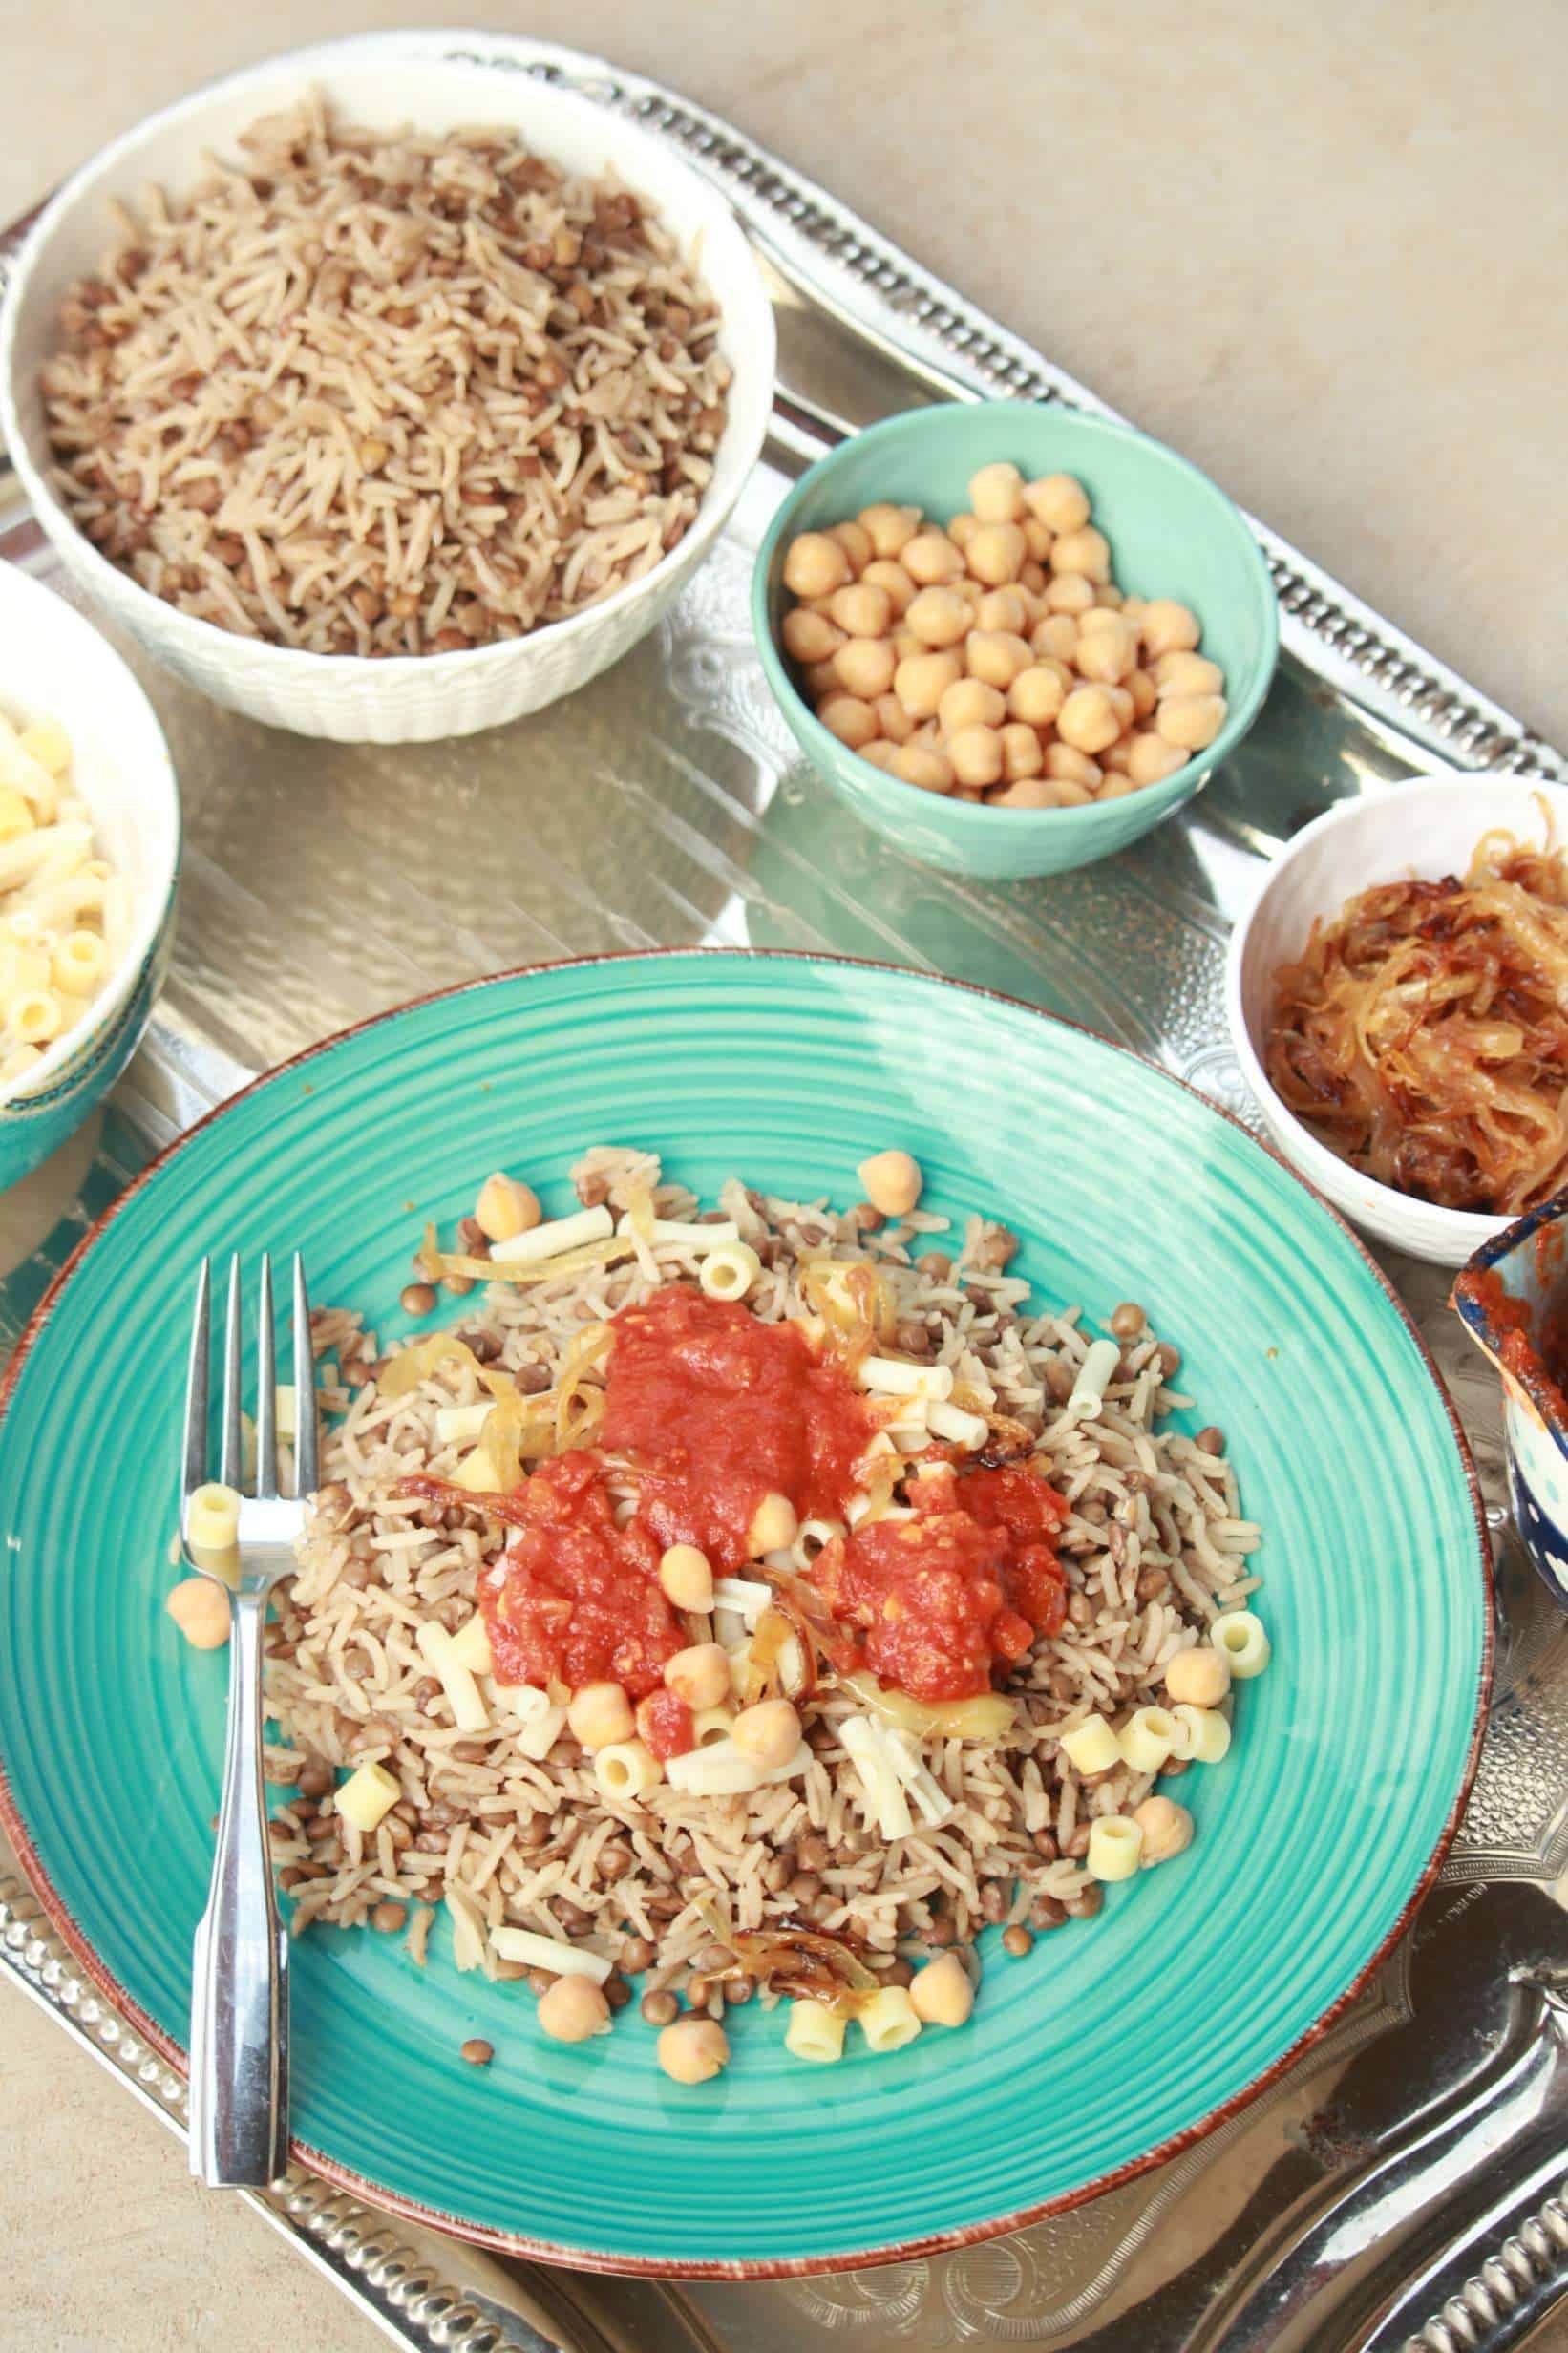 koshari in a plate with sides